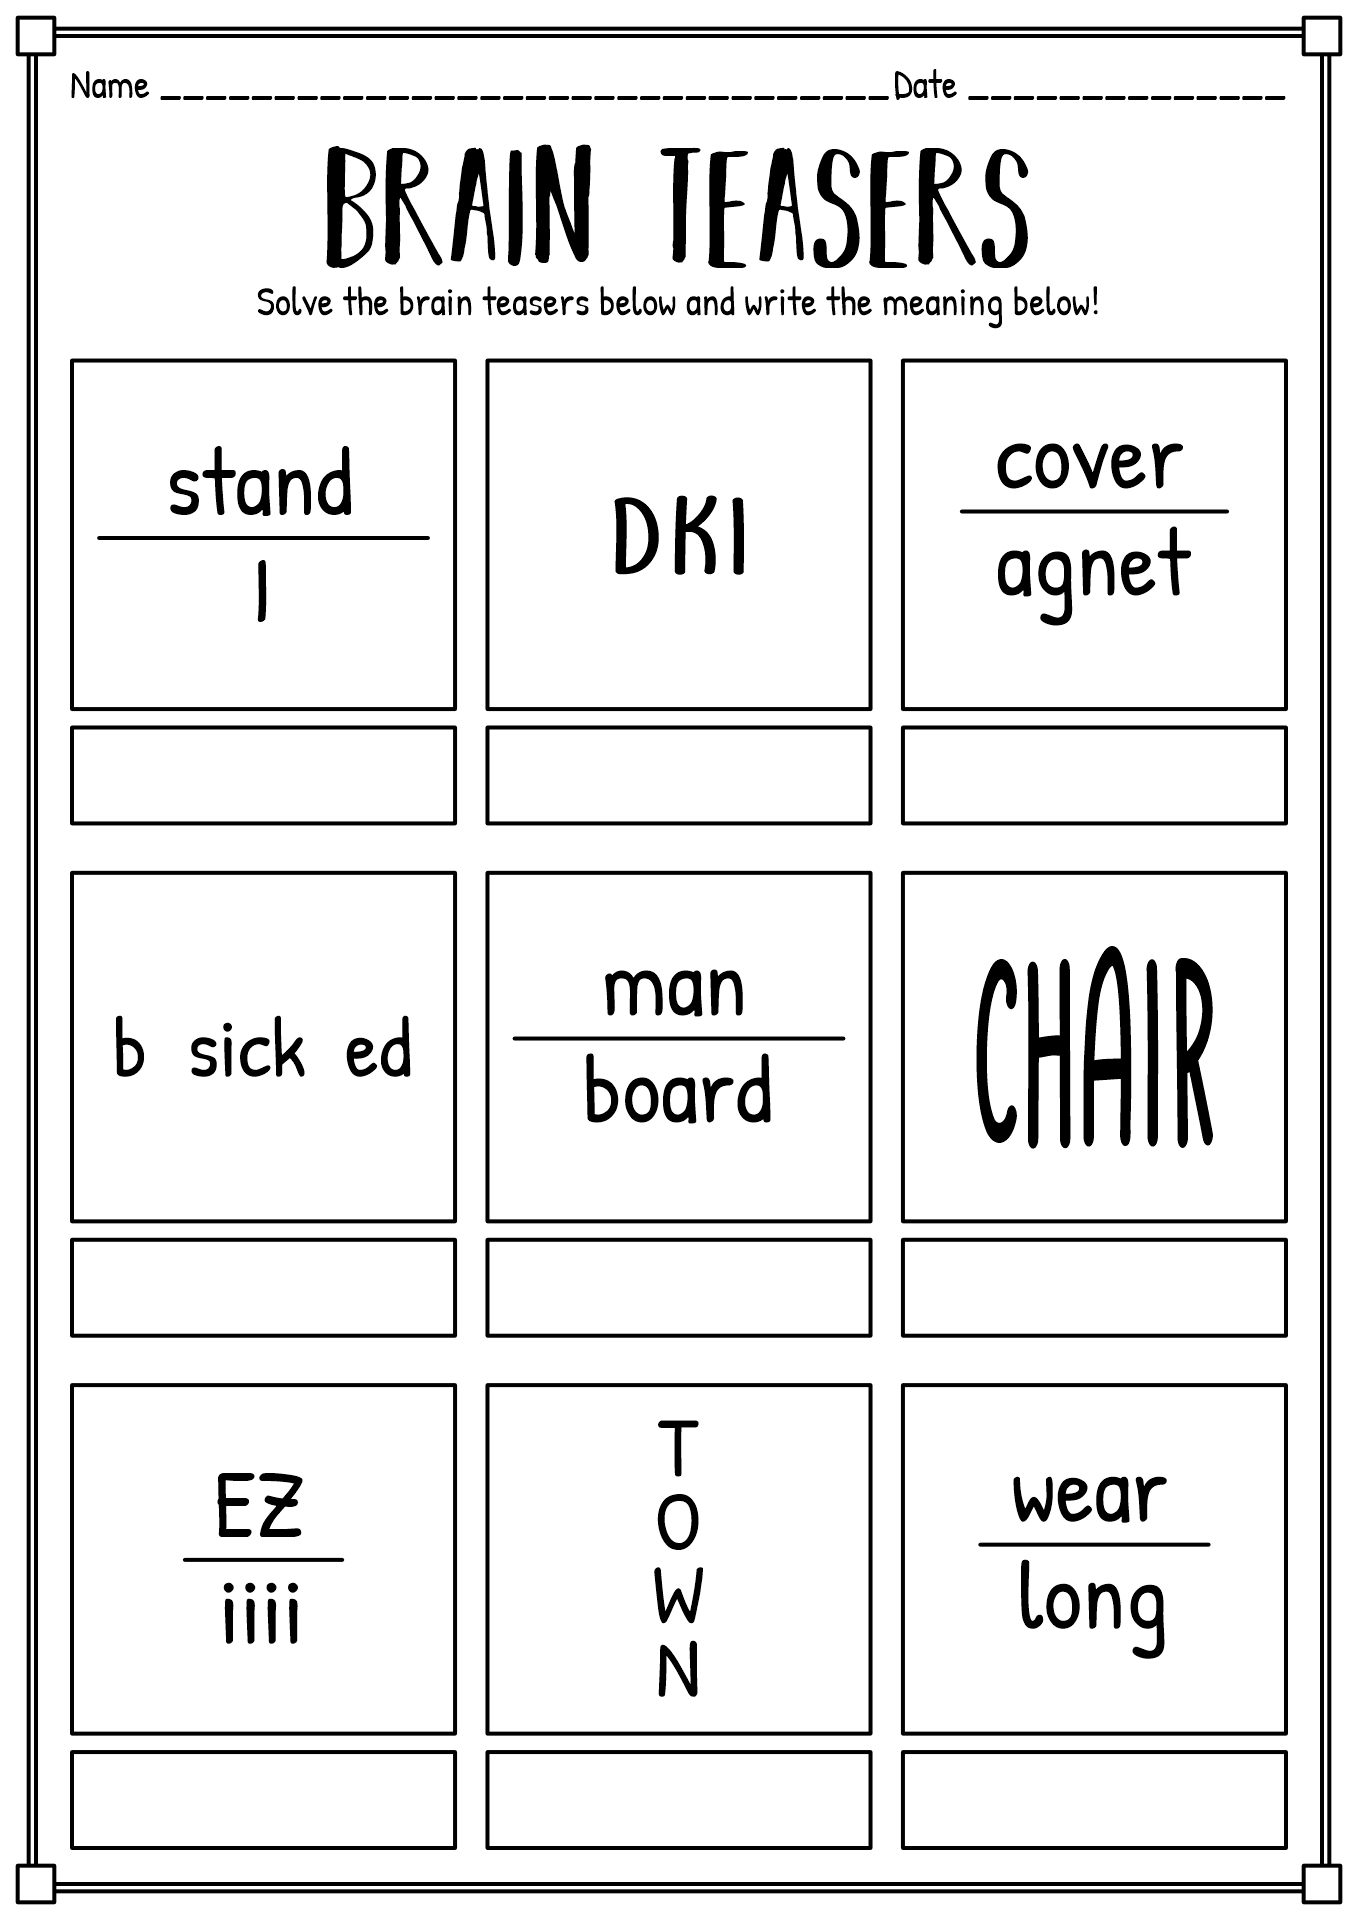 12 Best Images of Riddles And Brain Teasers Worksheets Printable